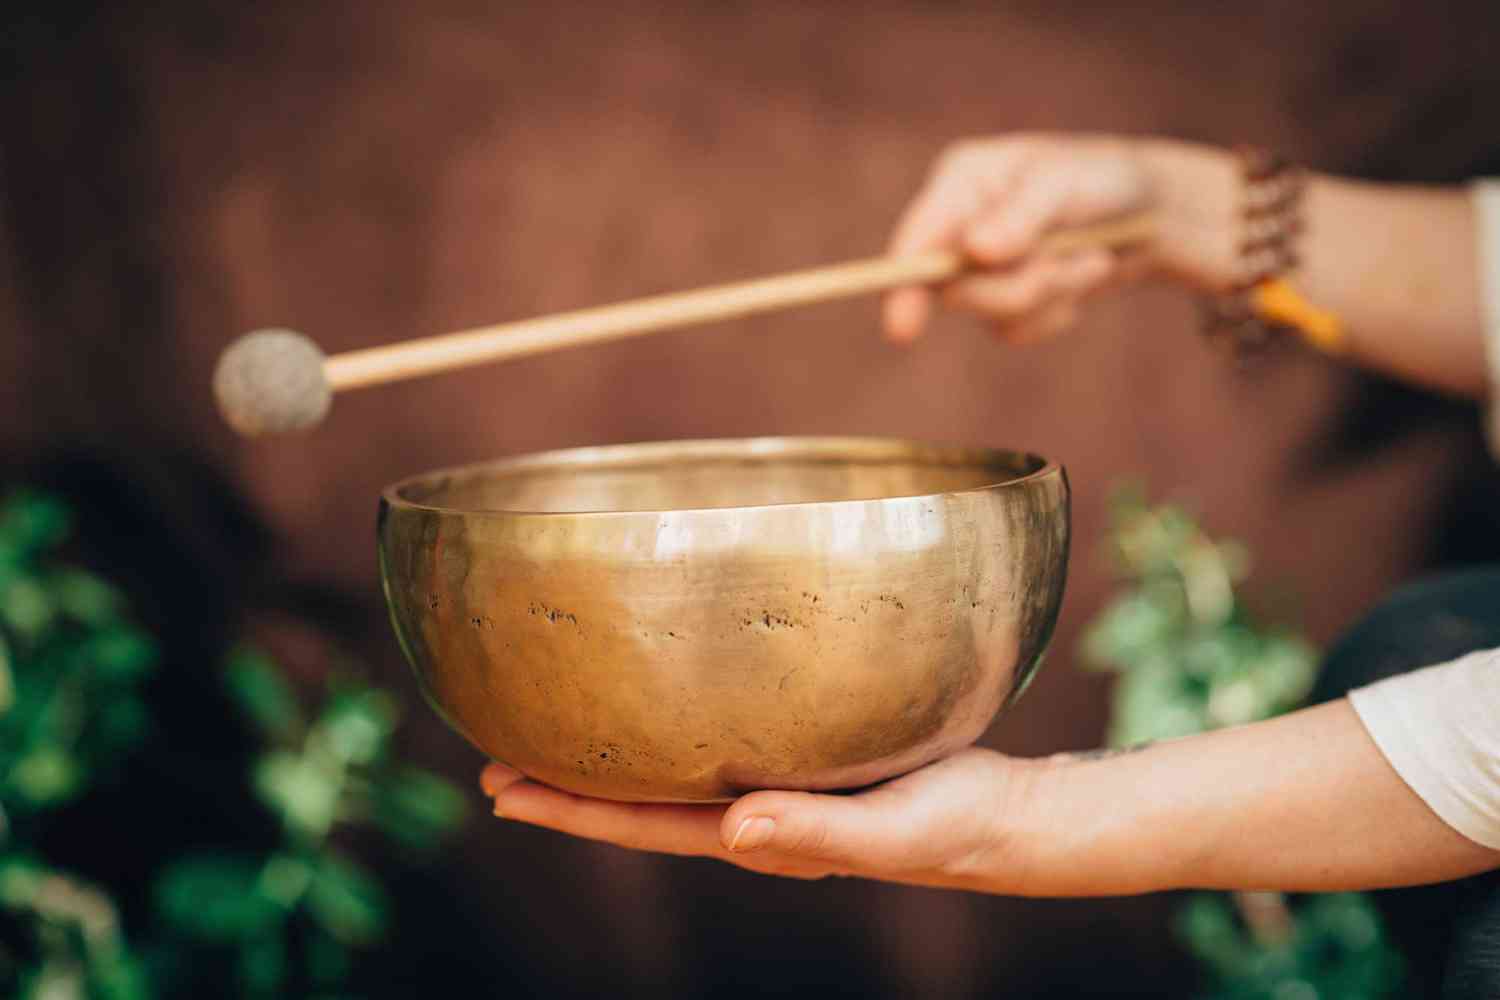 How to Use a Singing Bowl